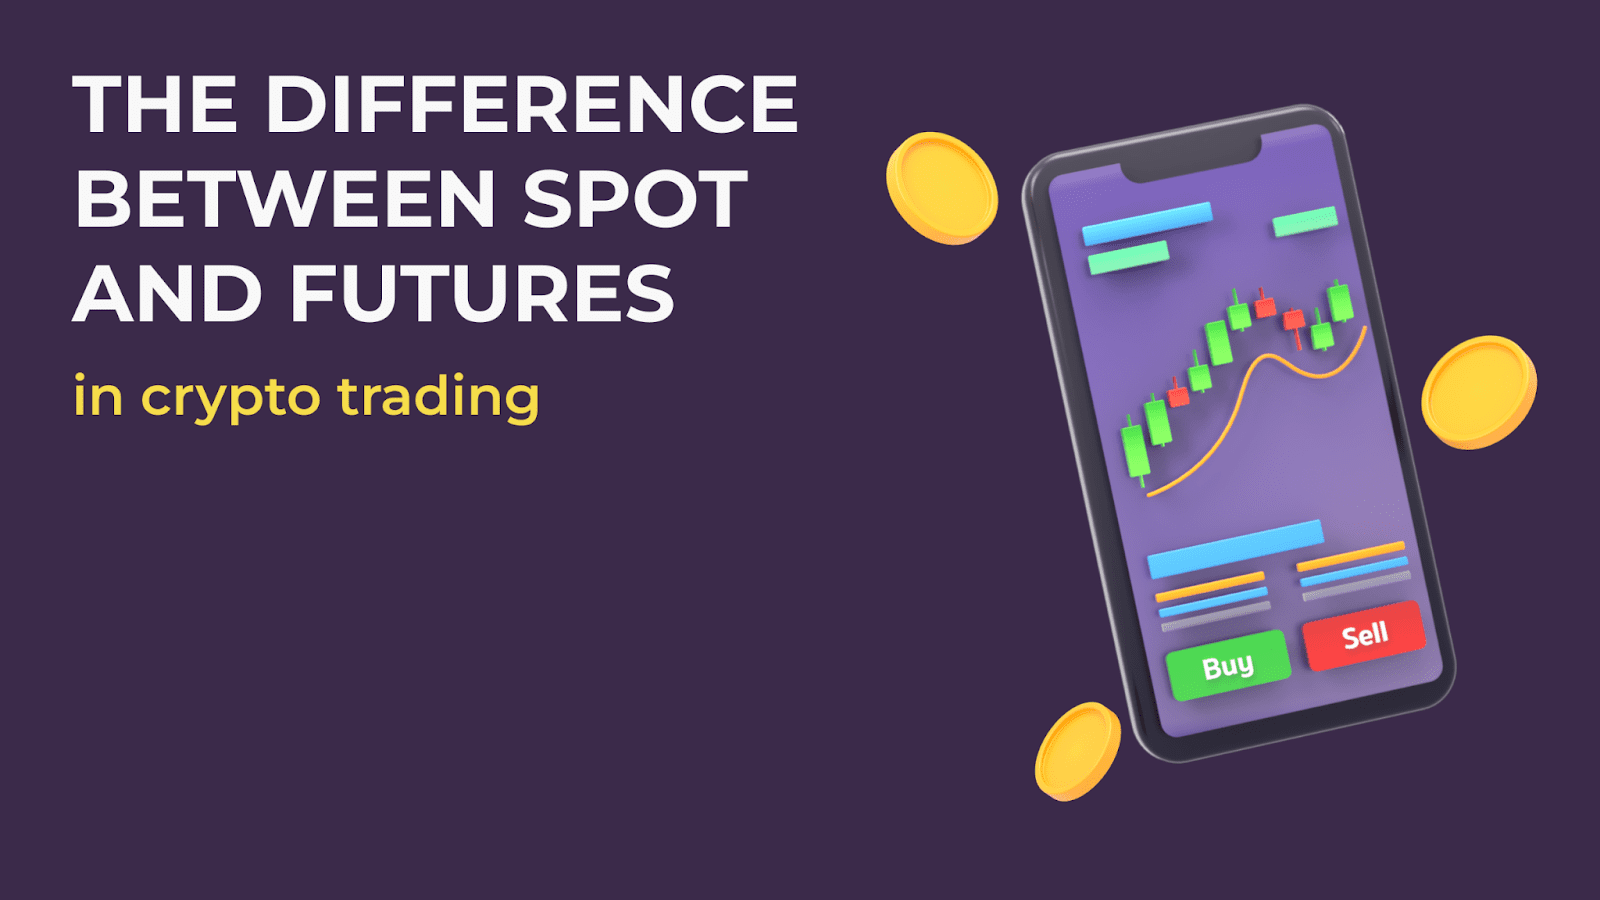 The difference between spot and futures in crypto trading